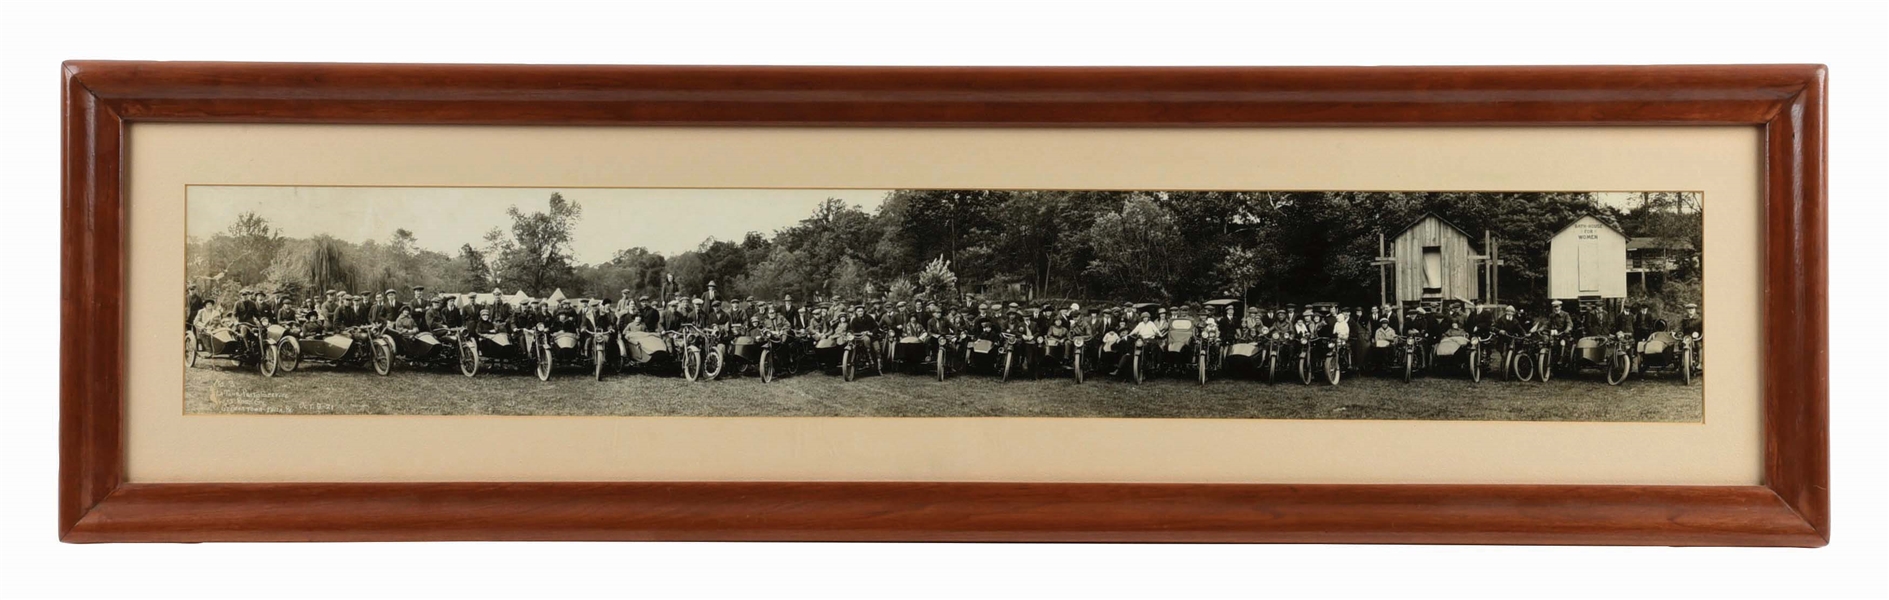 FRAMED YARDLONG PHOTO OF CIRCA 1920S MOTORCYCLISTS WITH SIDECARS. 